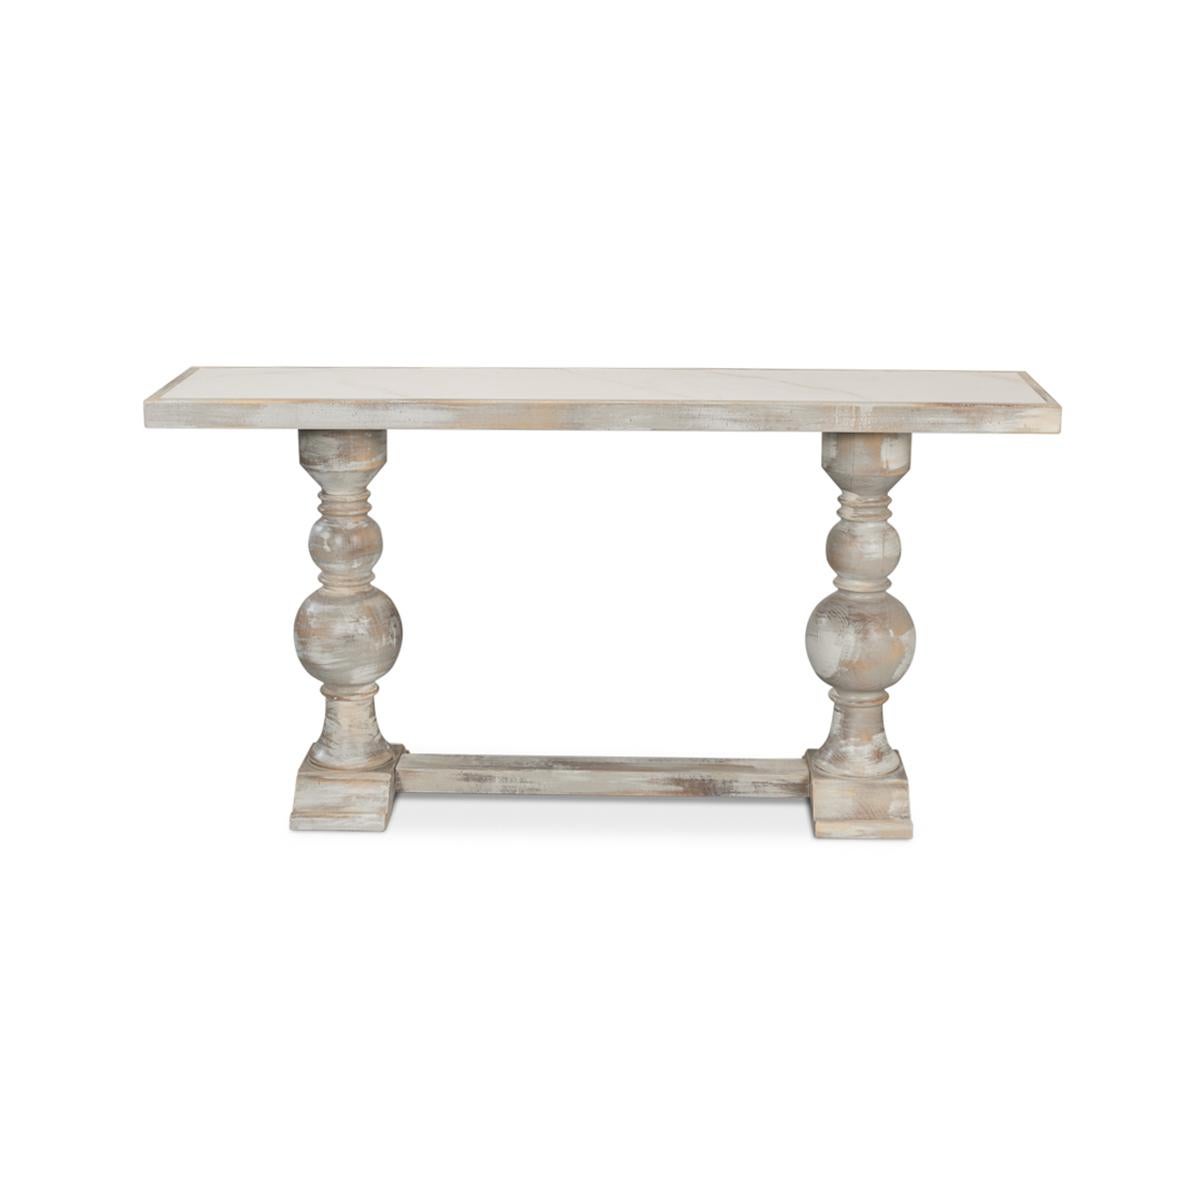 With a hand-rubbed and antiqued grey painted finish, the top inset with Calacatta gloss porcelain, raised two turned baluster legs with a stretcher base.

Dimensions: 61